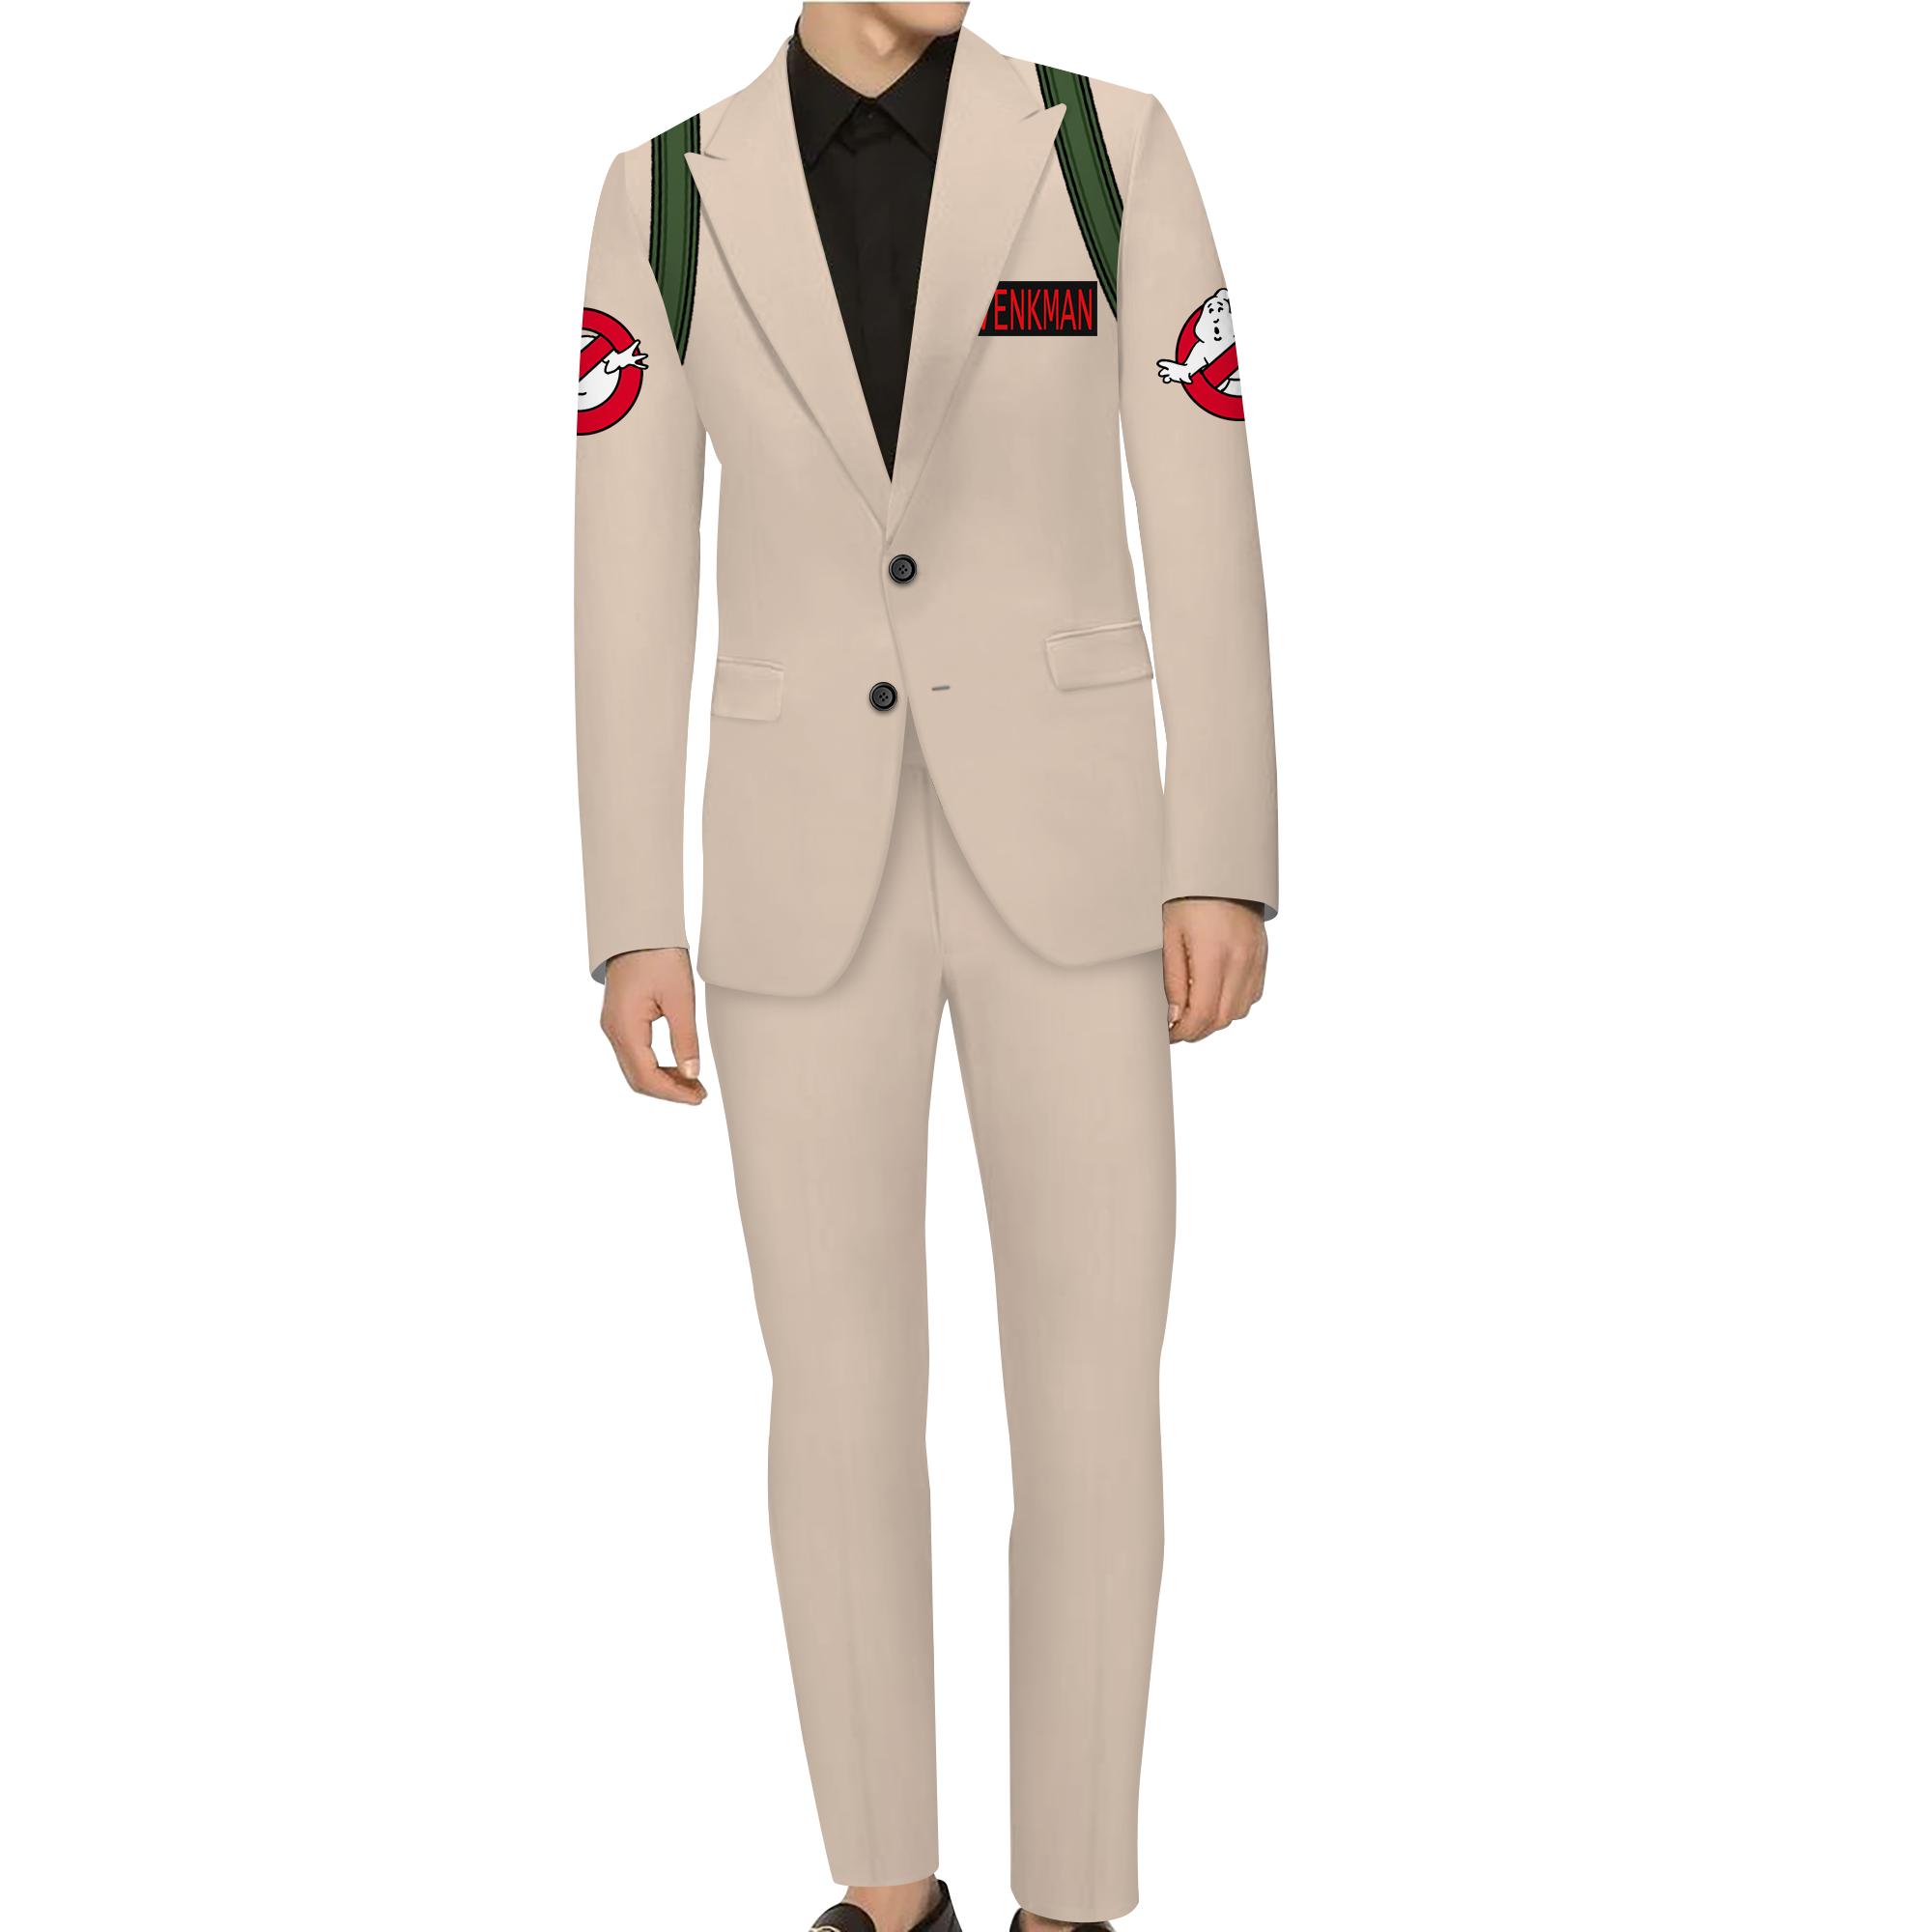 Rulercosplay Ghostbusters Men Slim Fit Suit Separates Jacket Slim 2 Button Blazer Pants For Party